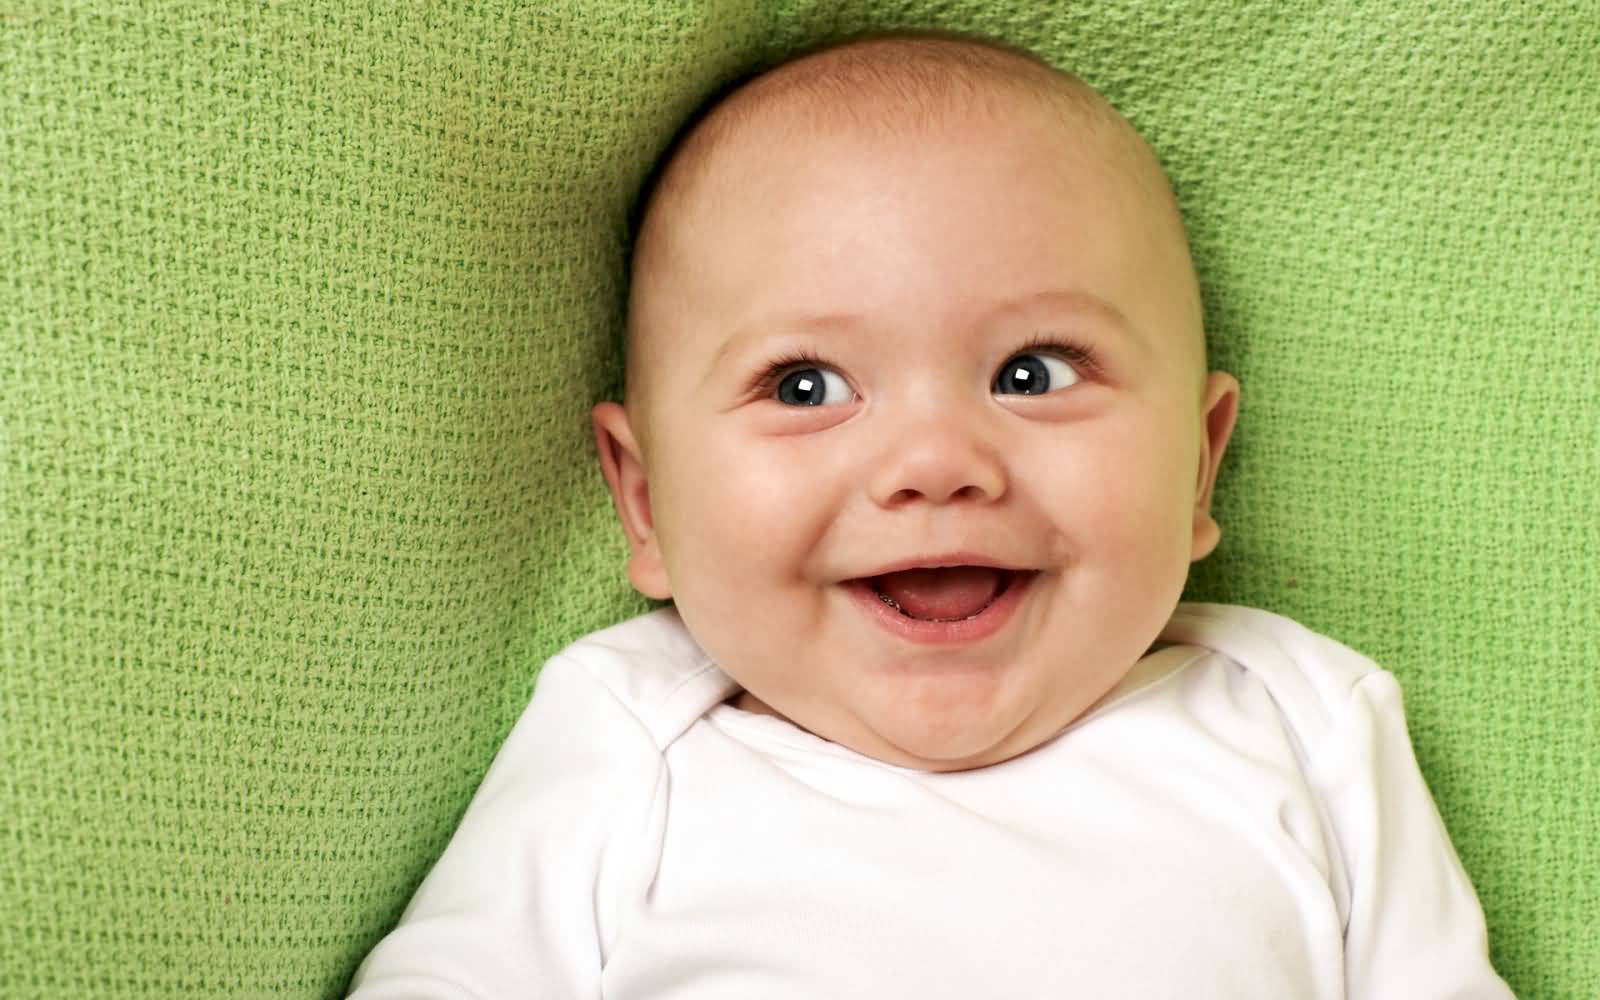 Smiling Baby Funny Image